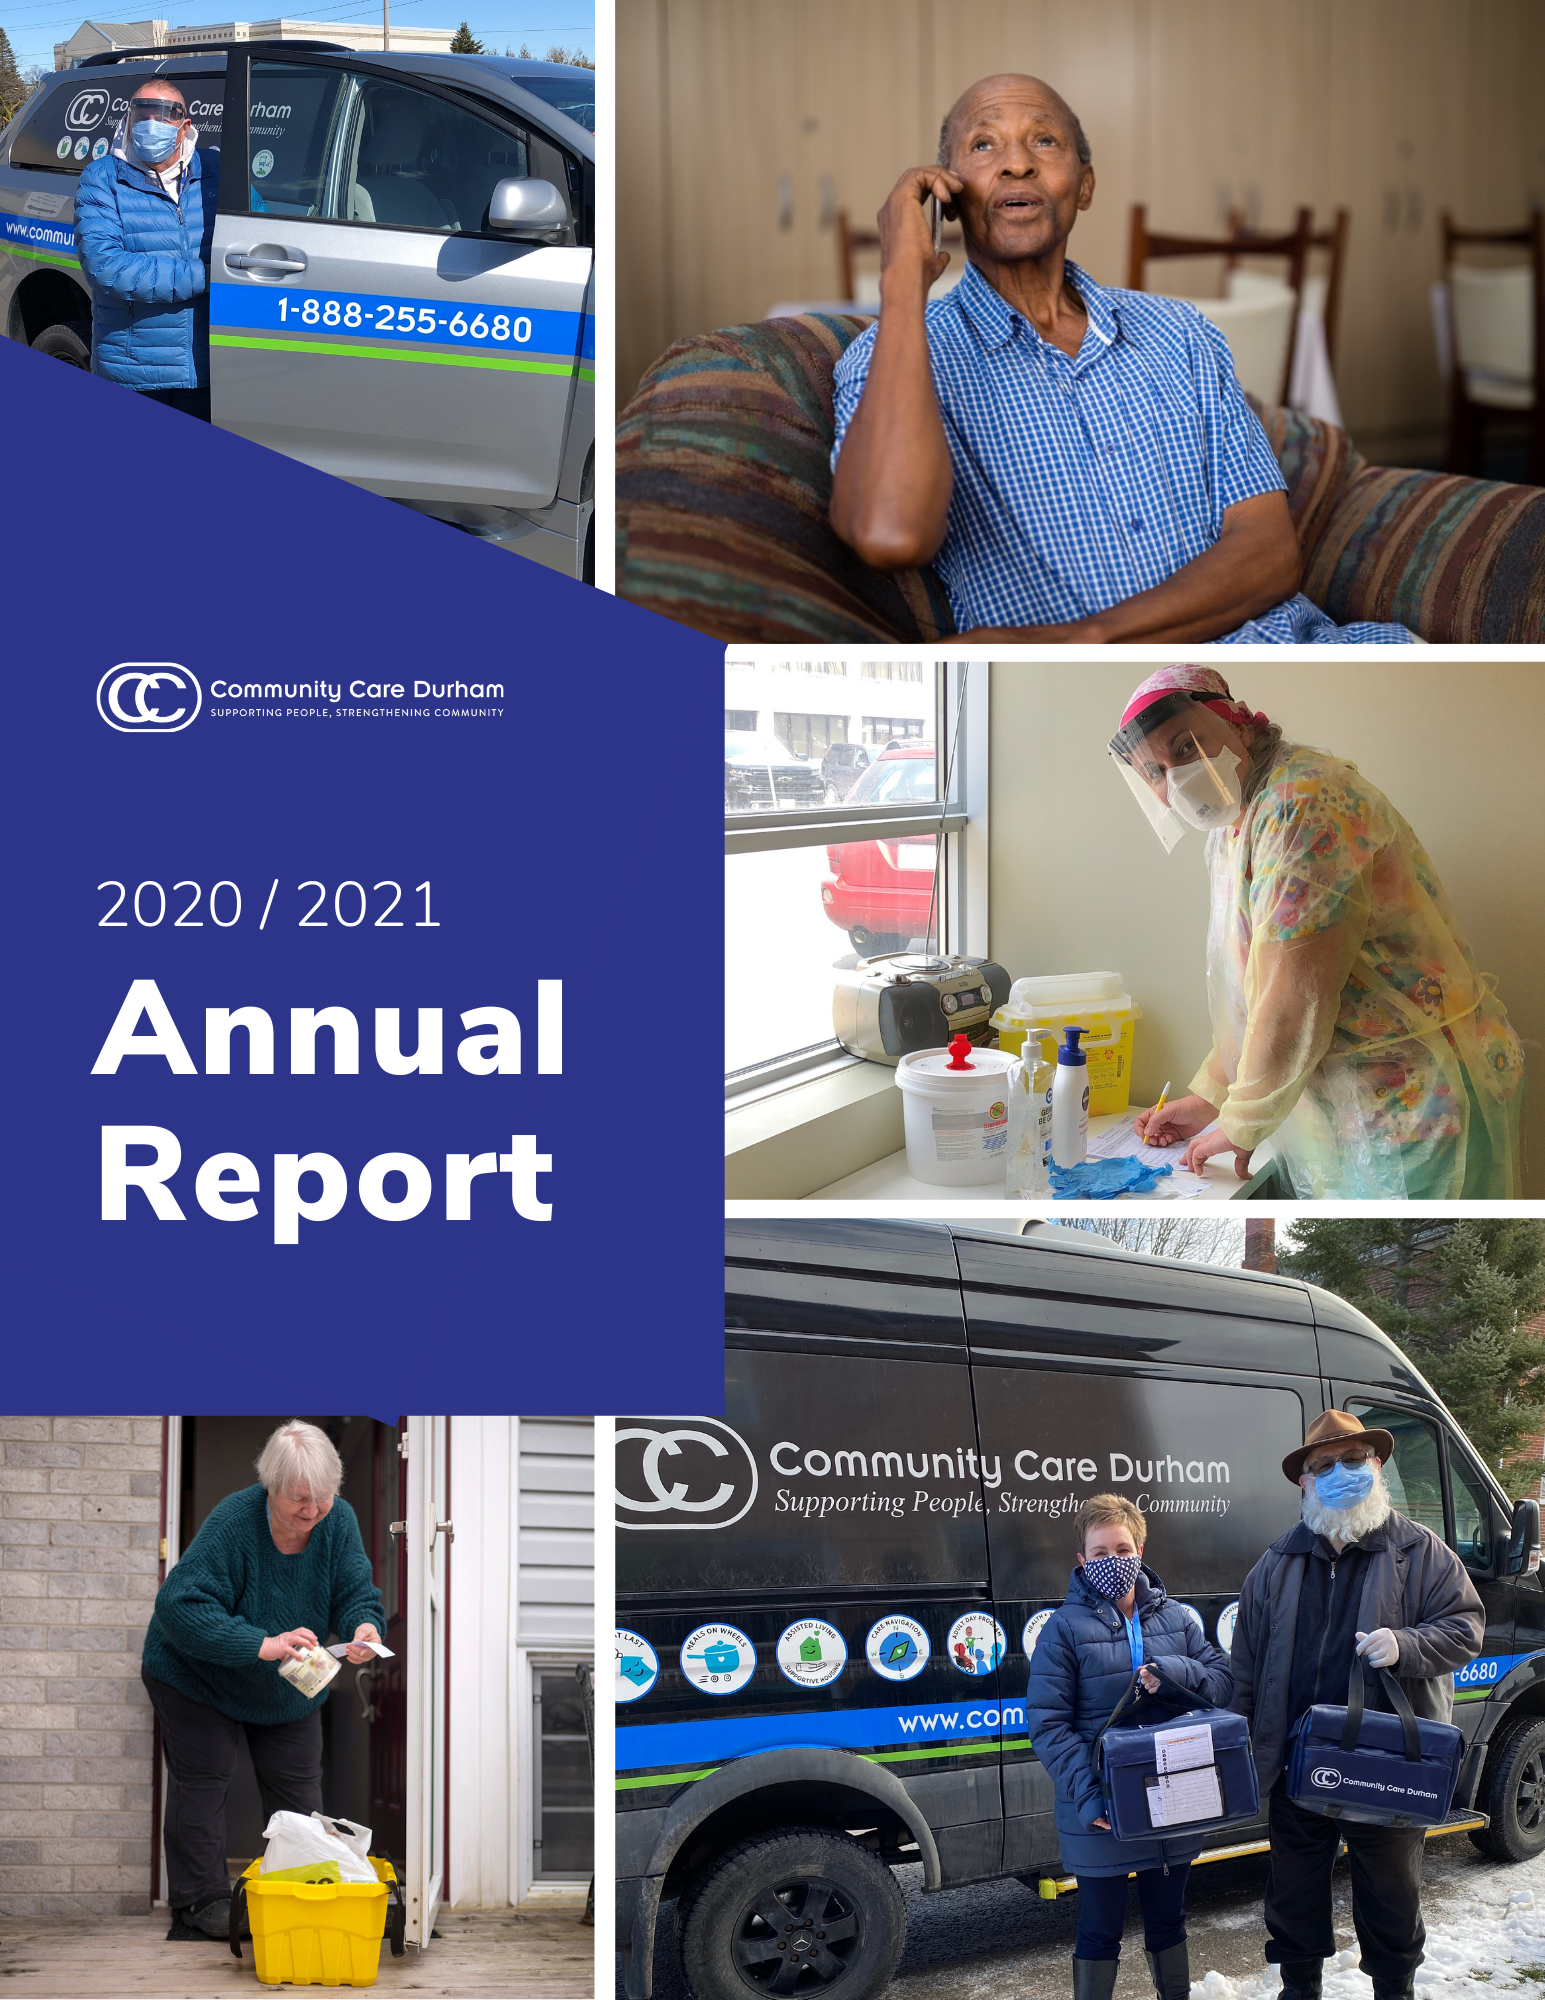 Cover artwork for CCDs 2020/21 annual report